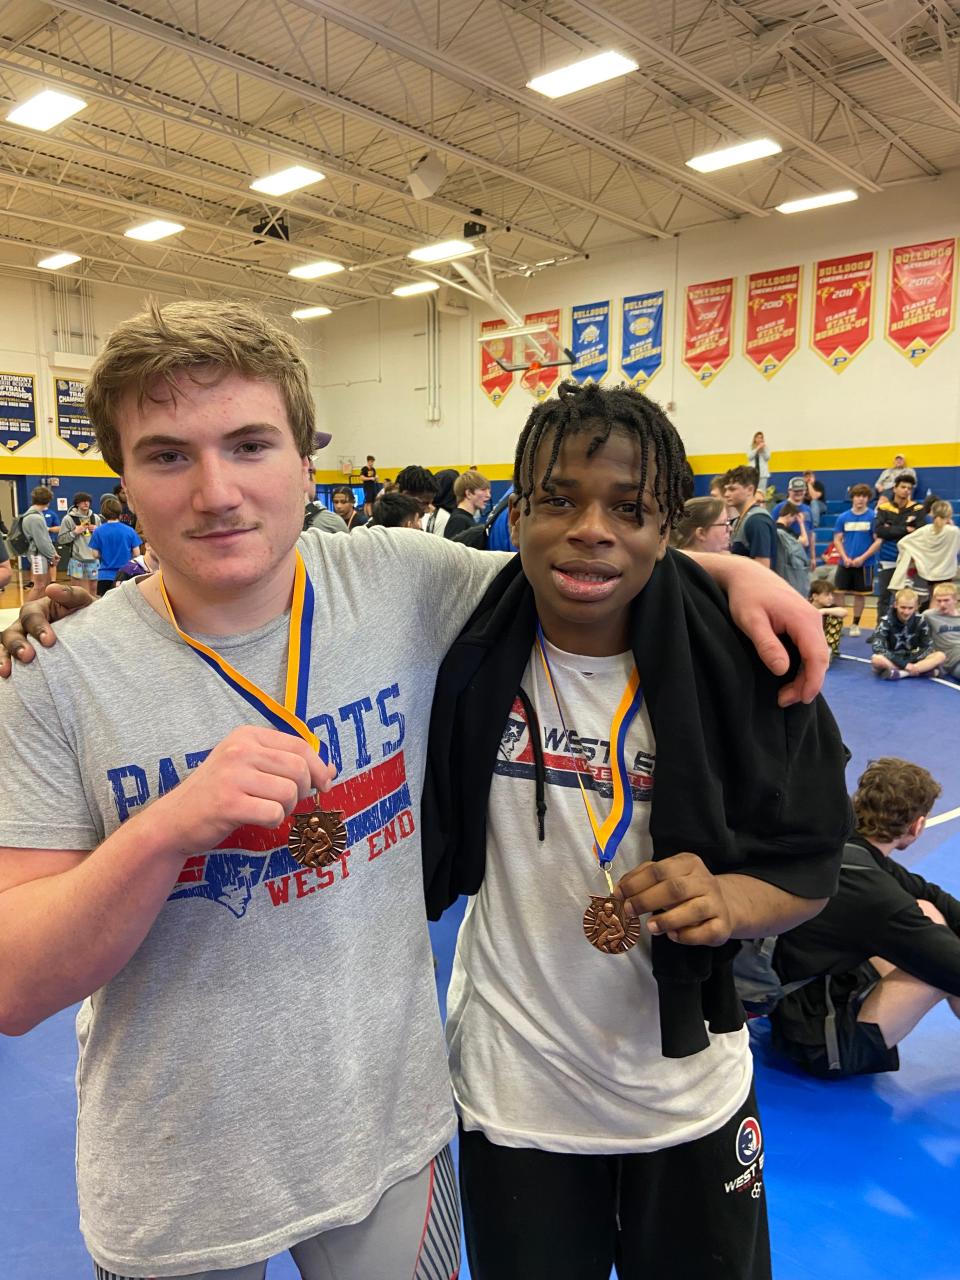 West End wrestlers Hunter Abercrombie and Braison Howard pose with their medals after an event.